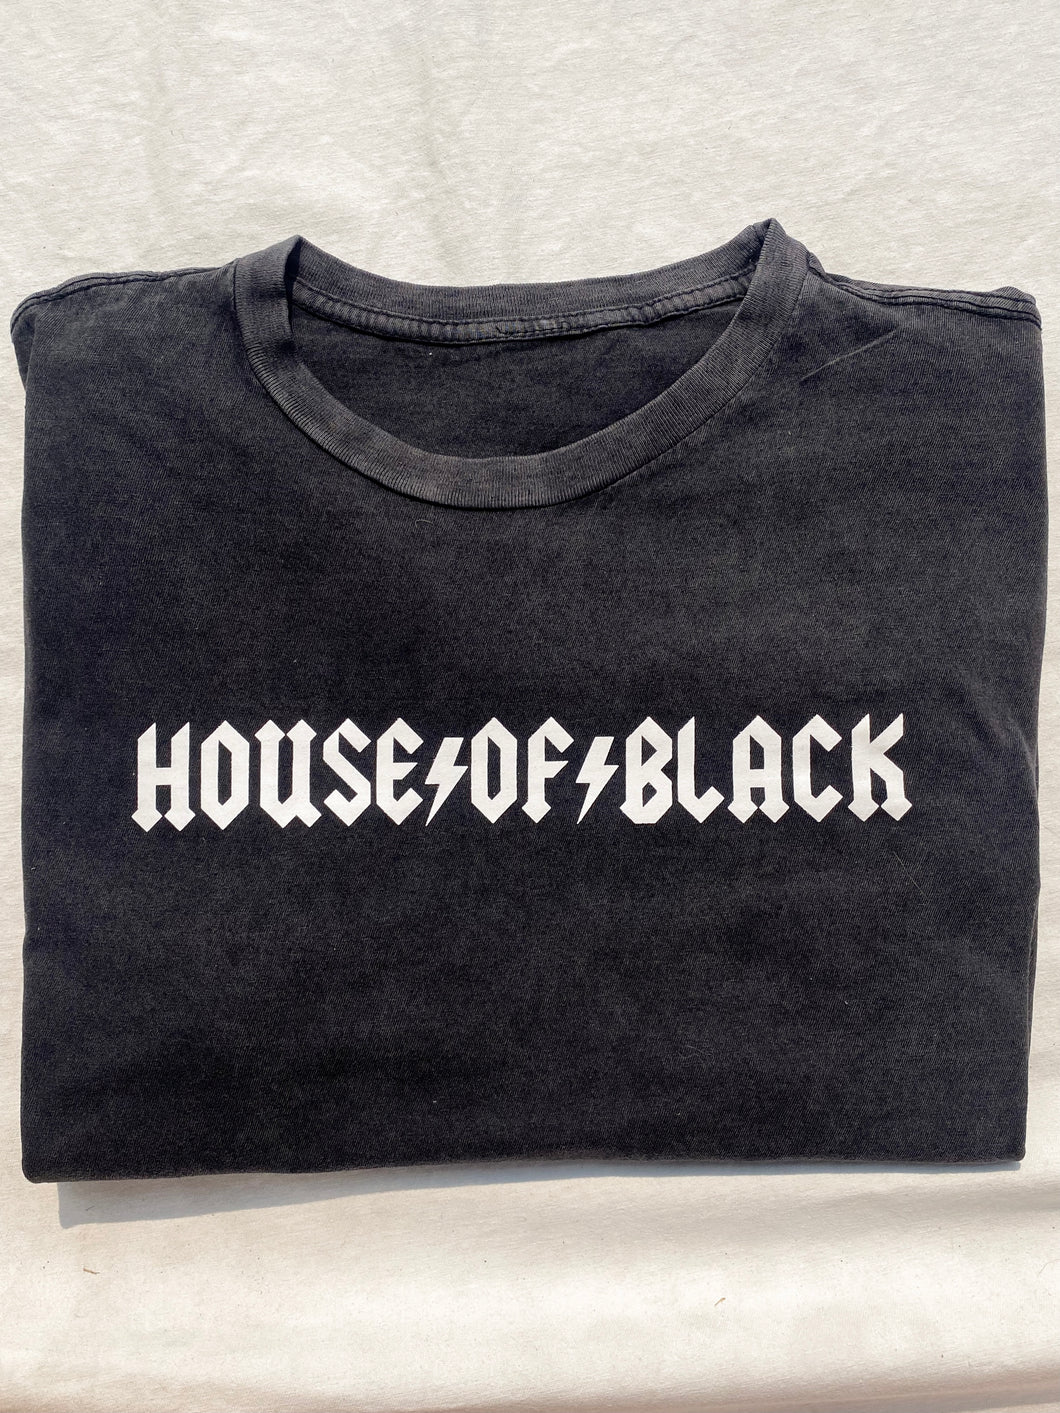 The House of Black Tee.